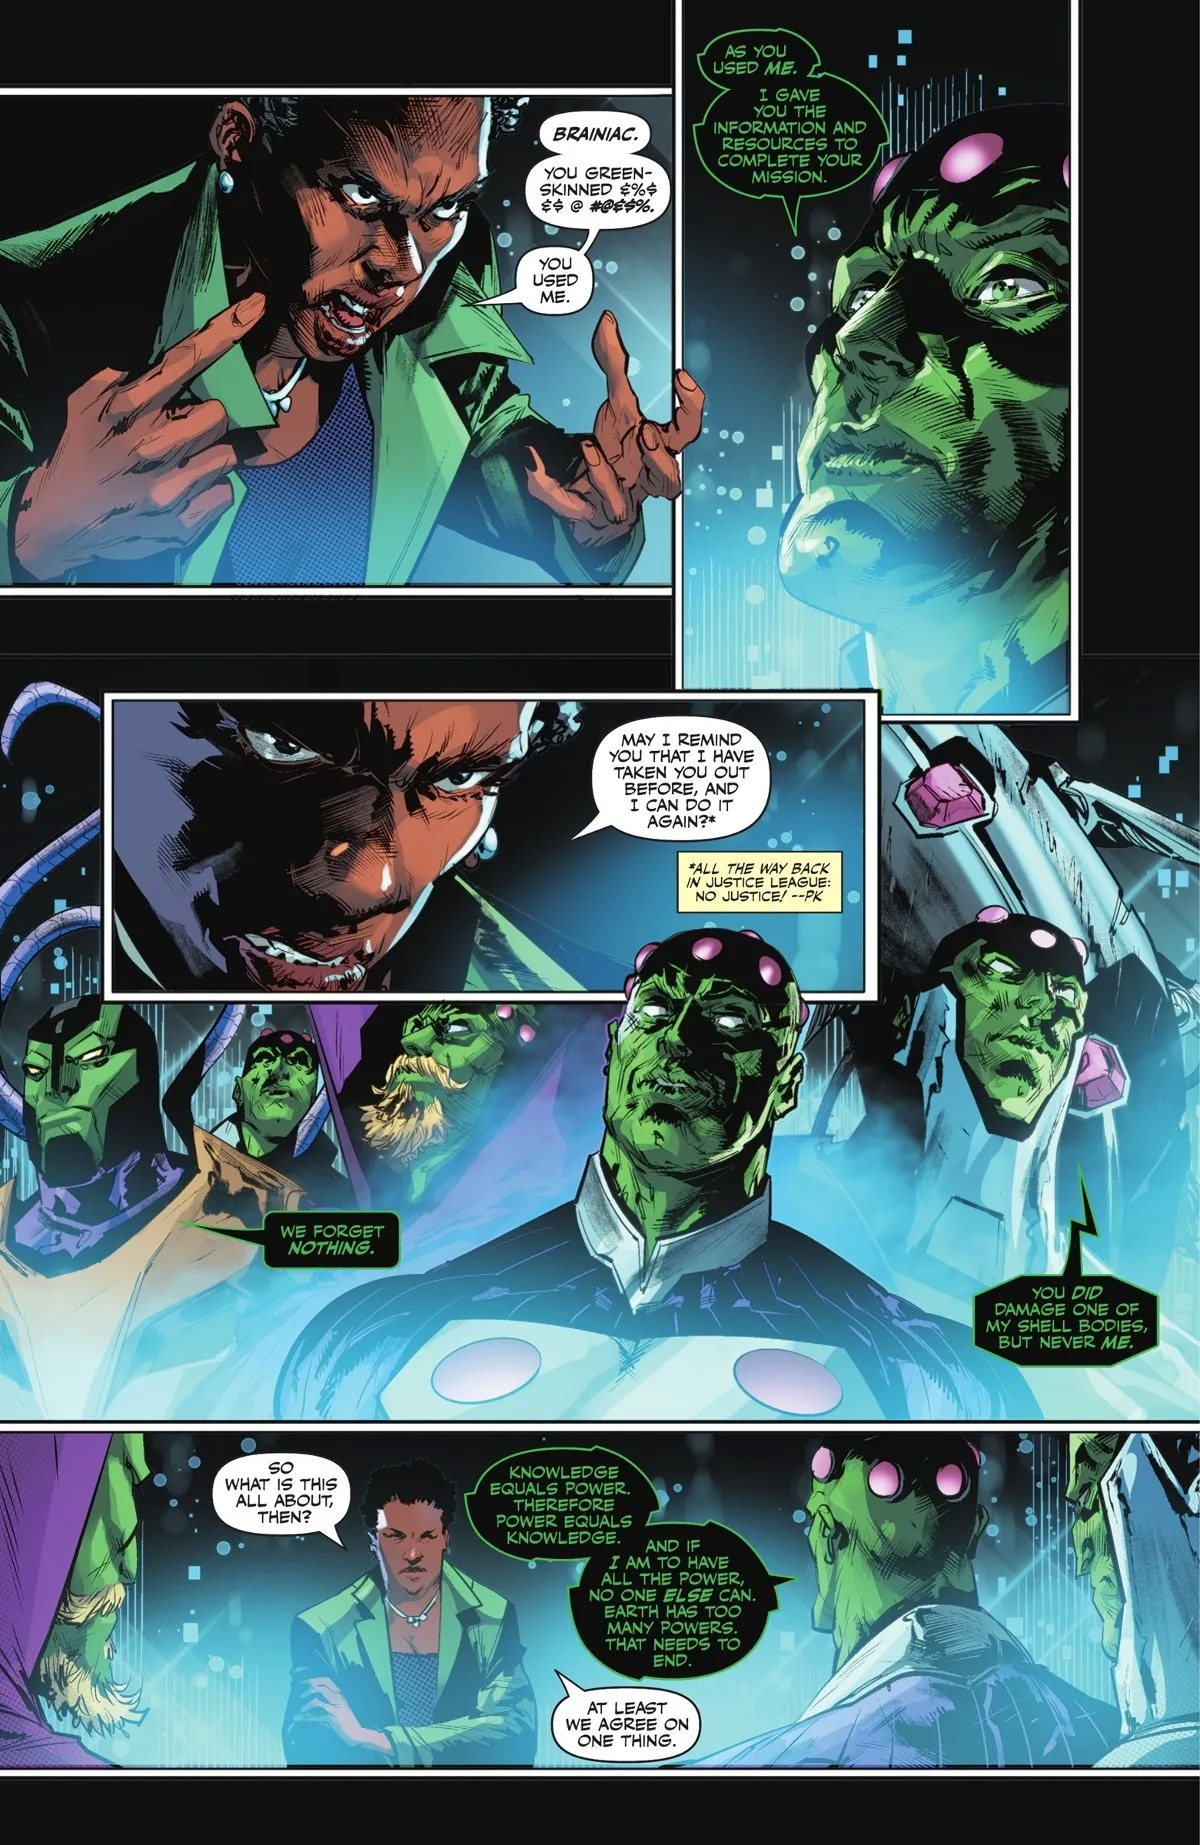 Art from Superman: House of Braniac special